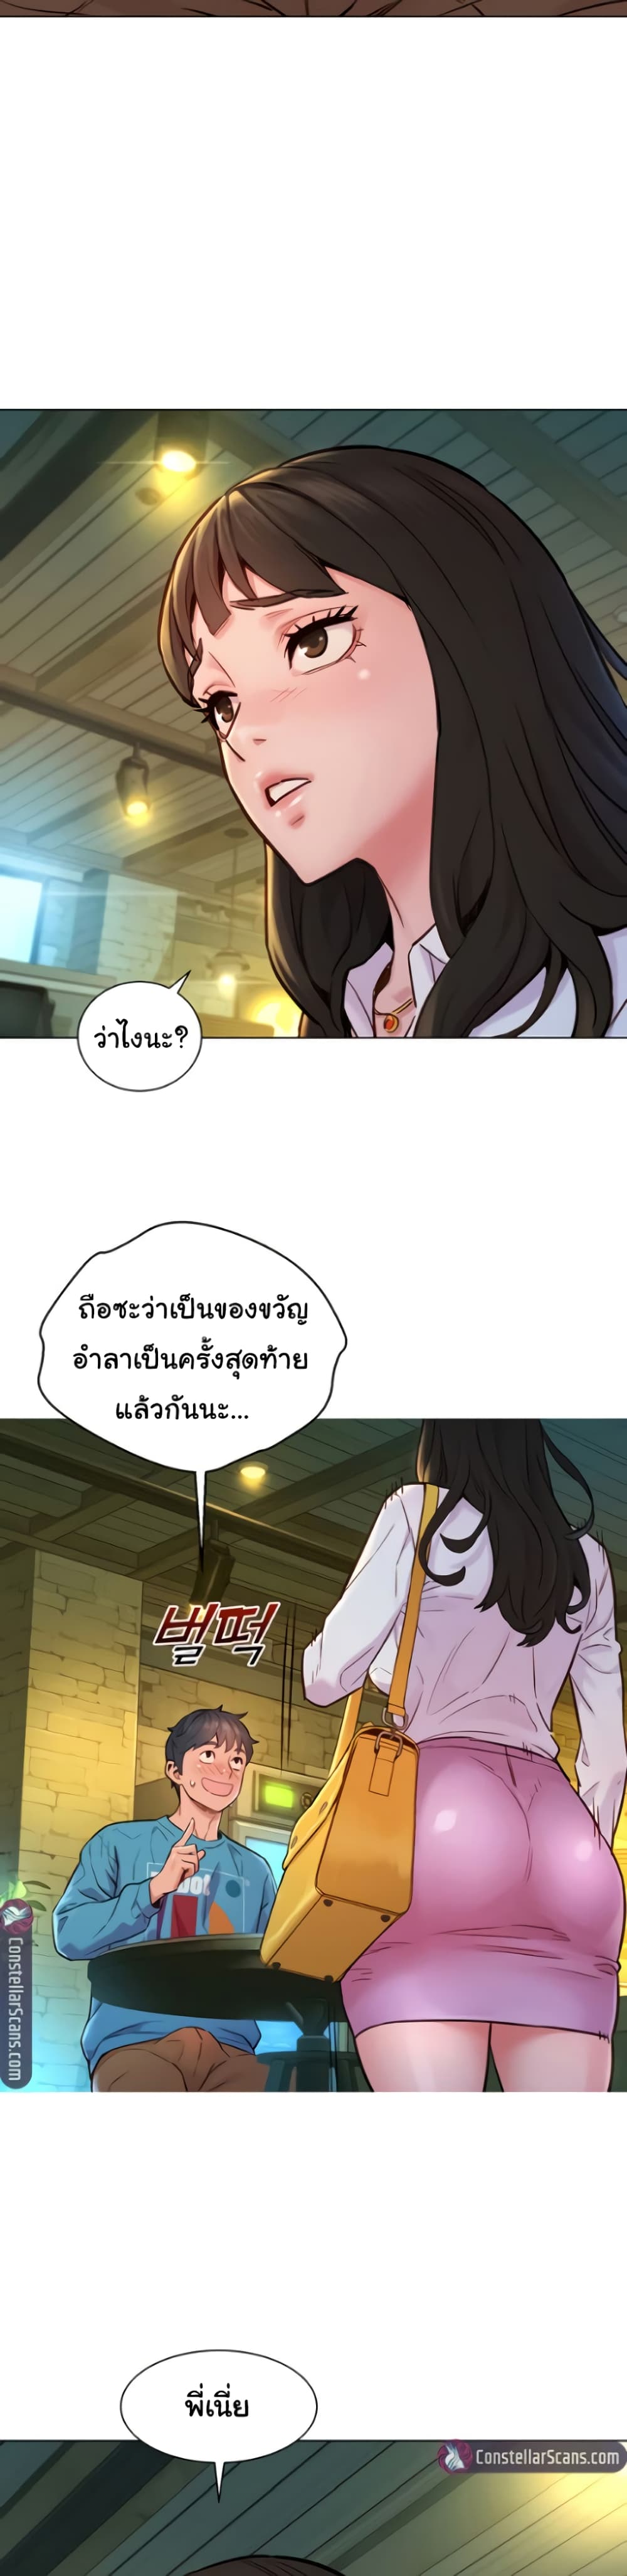 Let’s Hang Out from Today ตอนที่ 1 ภาพ 15